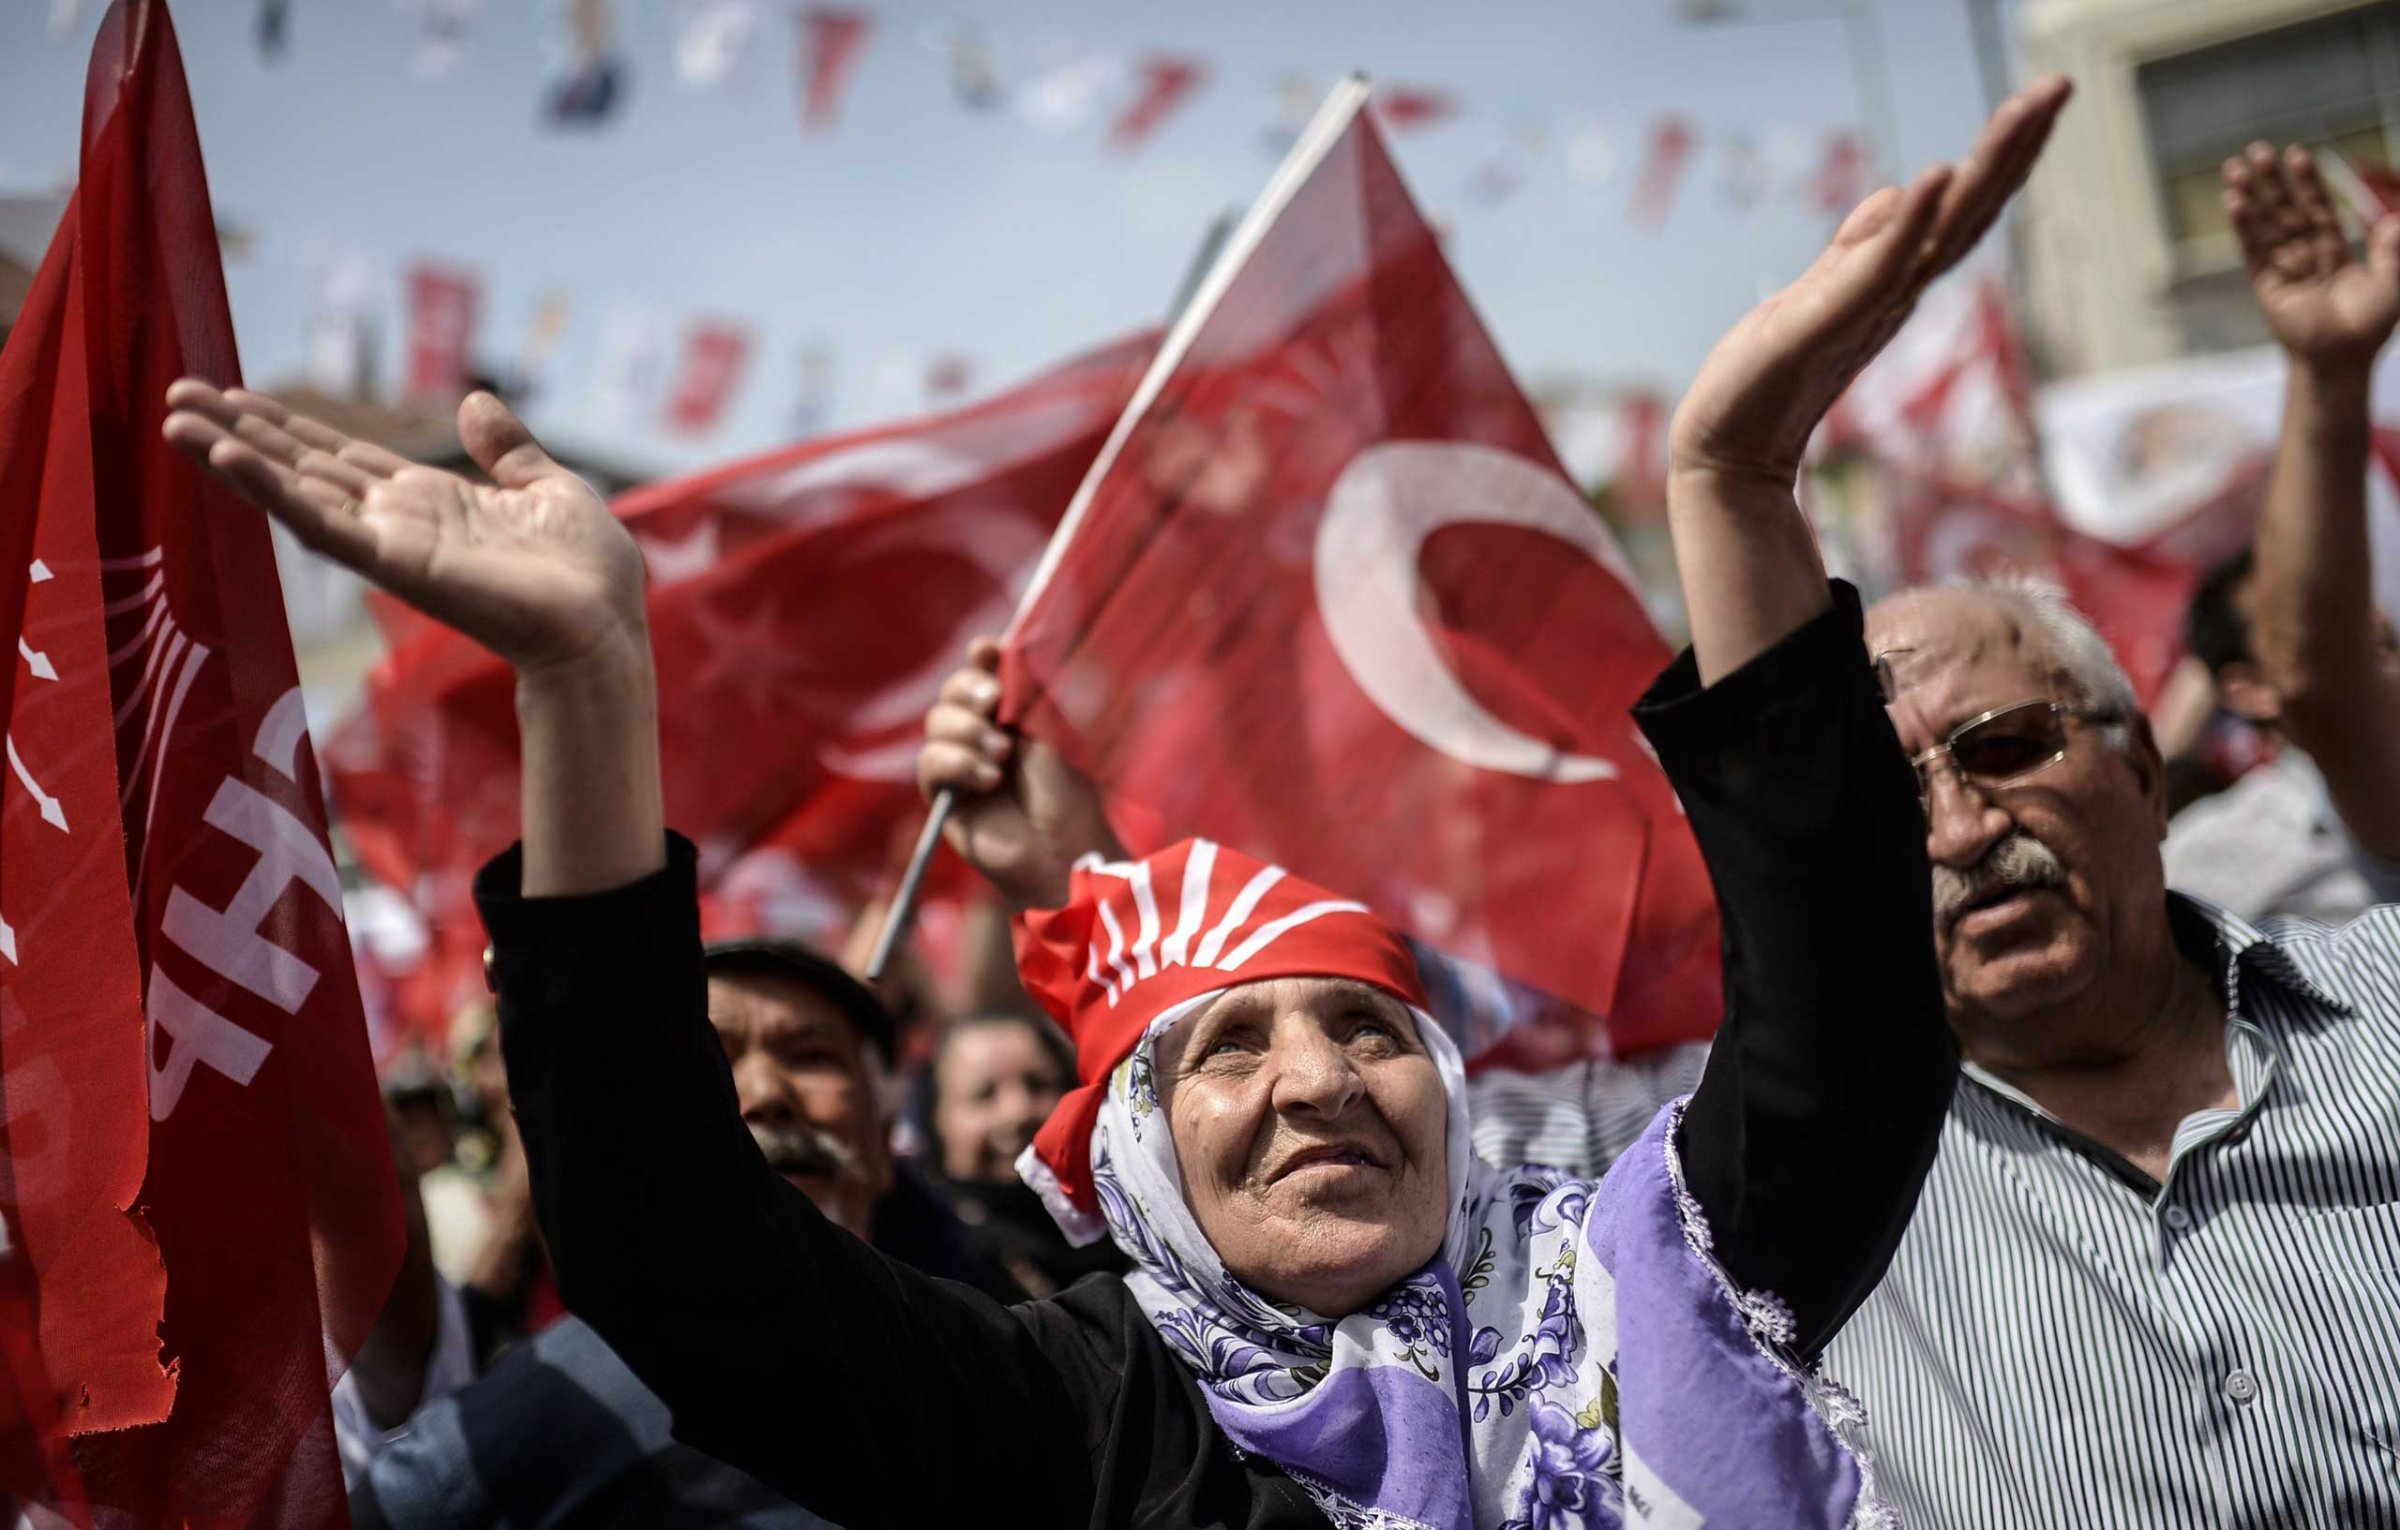 Supporters of Turkey's main opposition party, the Republican People’s Party (CHP) cheer their leader during an election rally ahead of the legislative election in Istanbul on May 24, 2015.